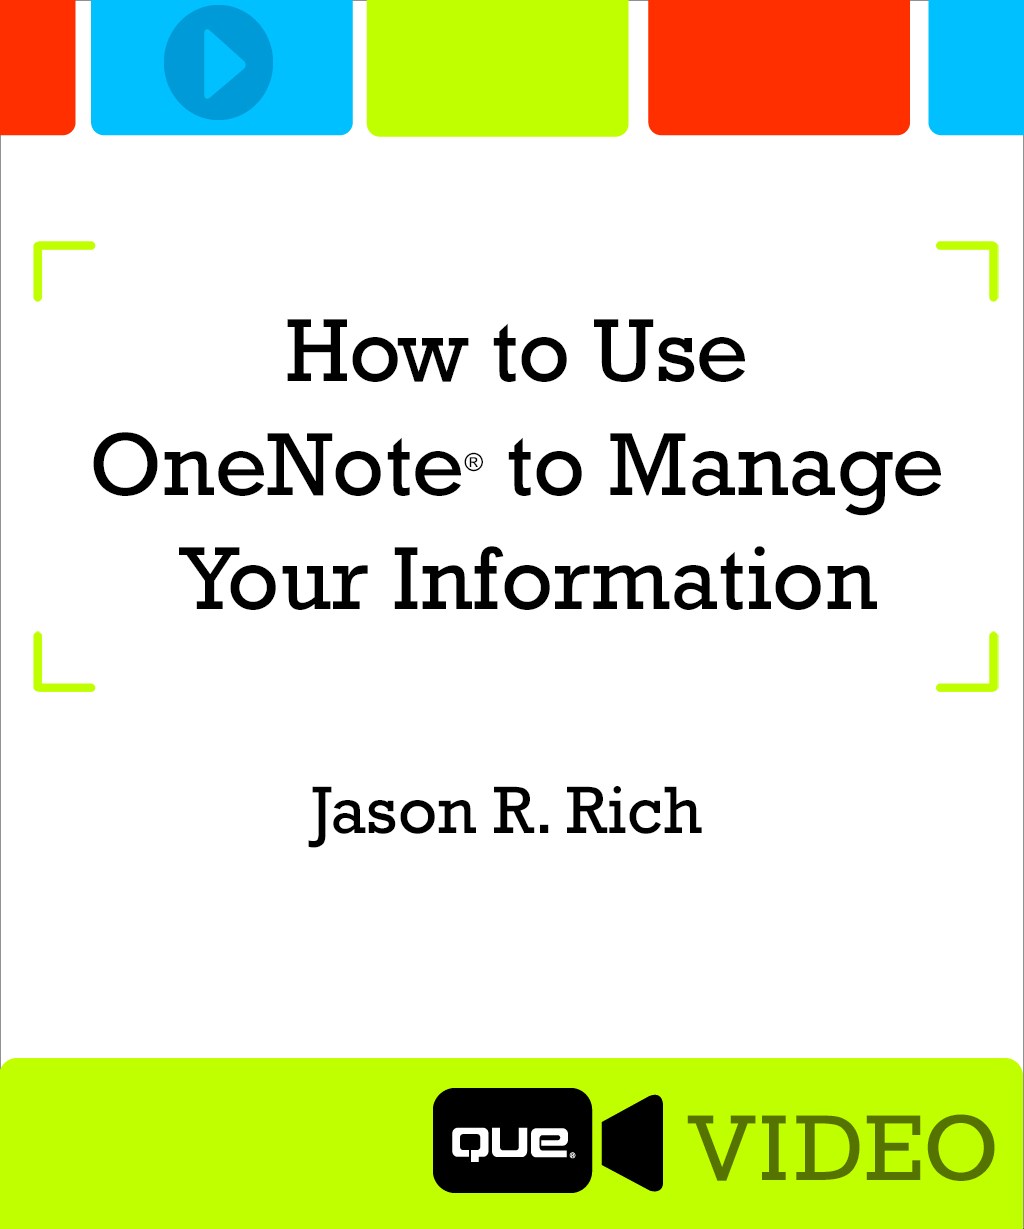 Part 3: Organizing OneNote Content